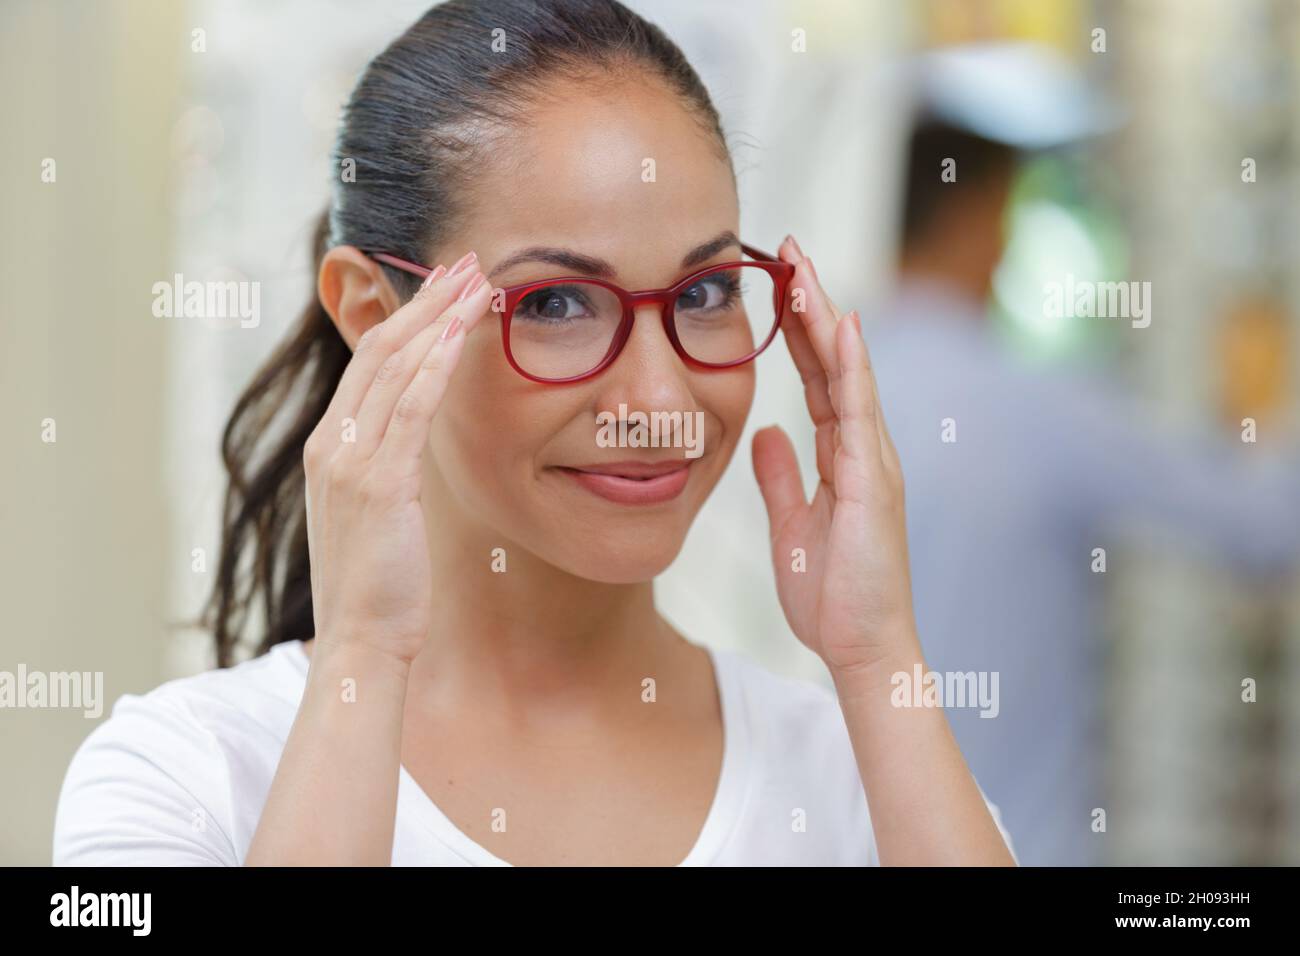 woman buys glasses in an optic store Stock Photo